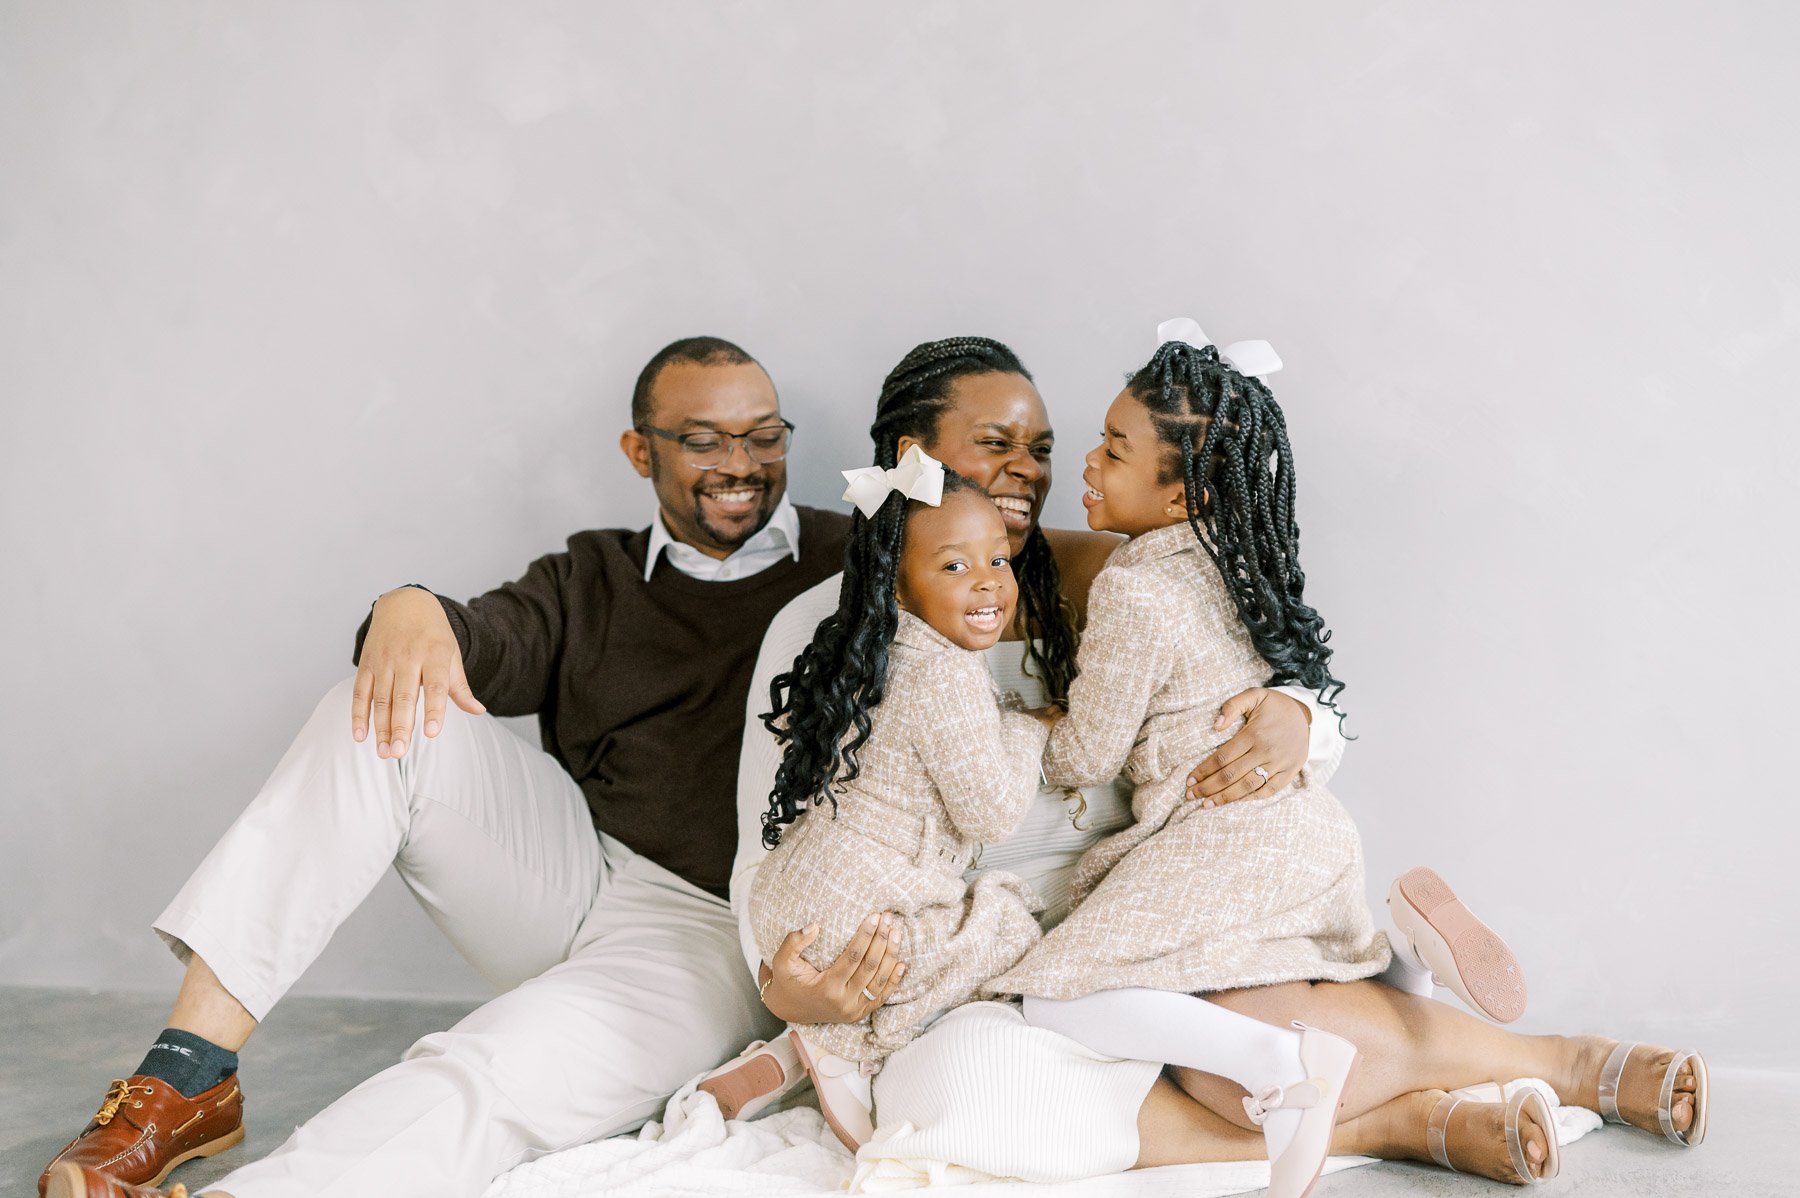 Troy NY Family Studio Photos by Michelle Lange Photography-6.jpg